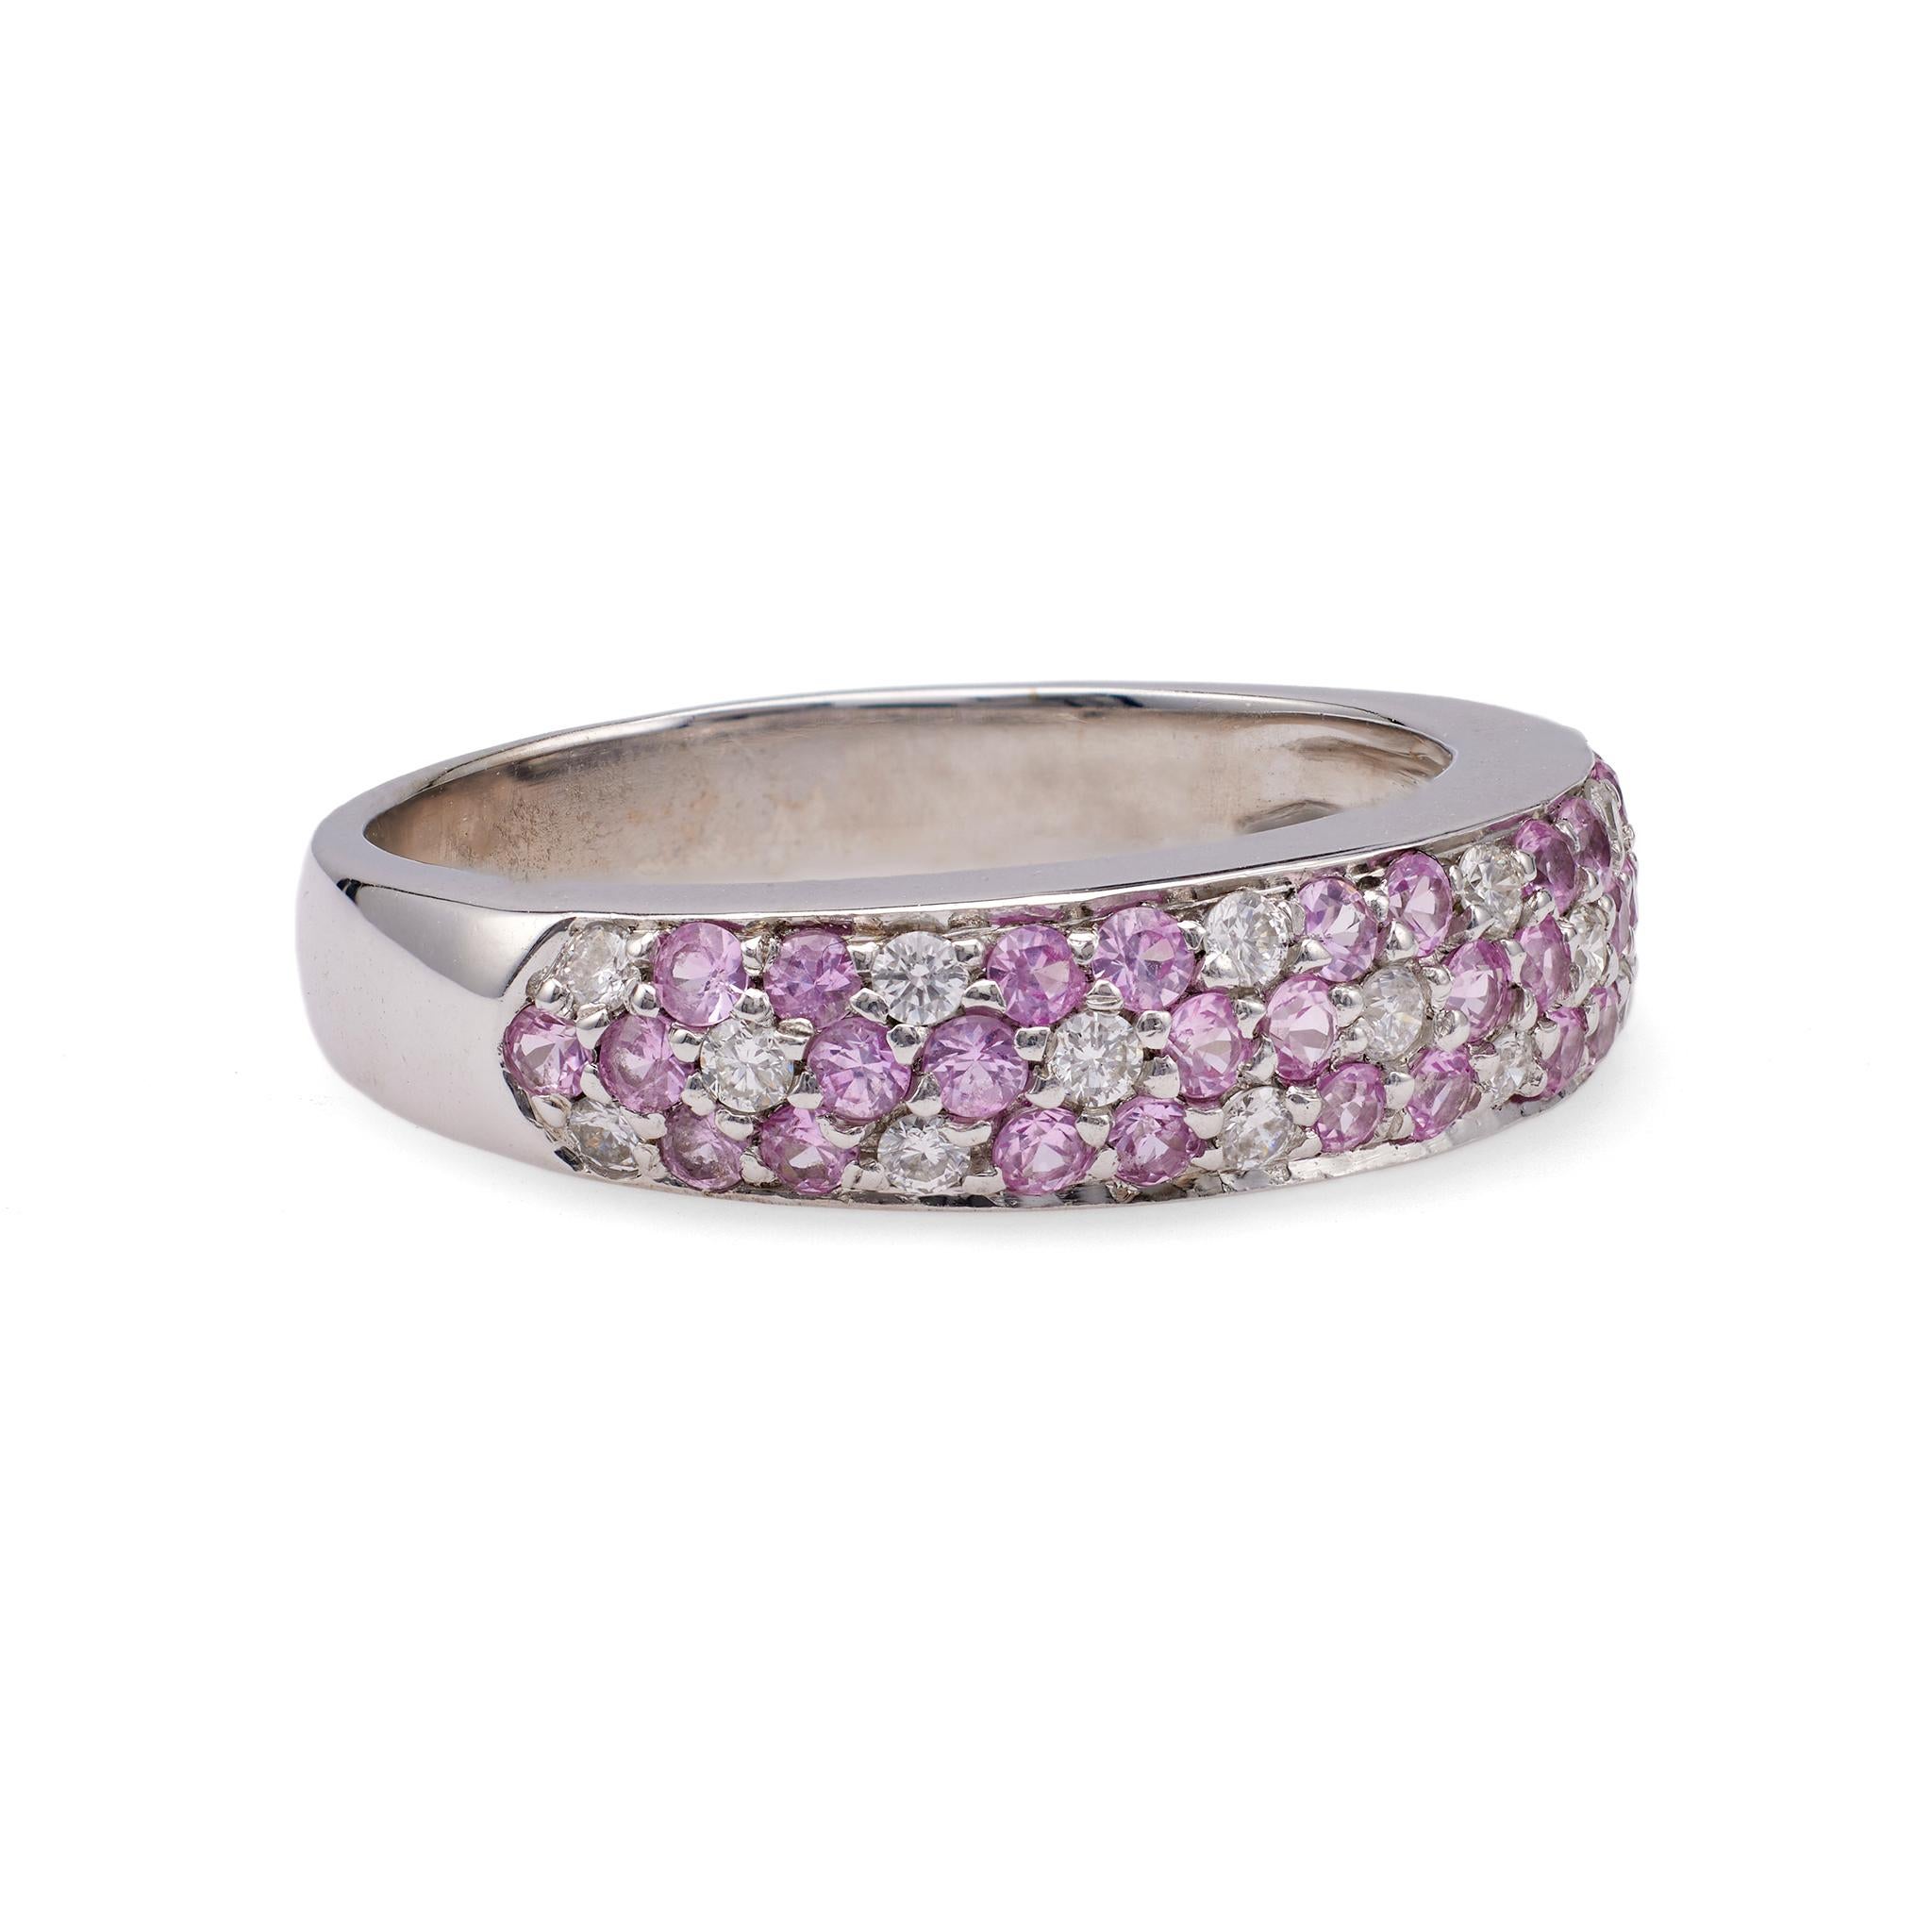 Le Vian Diamond Pink Sapphire 14k White Gold Ring In Excellent Condition For Sale In Beverly Hills, CA